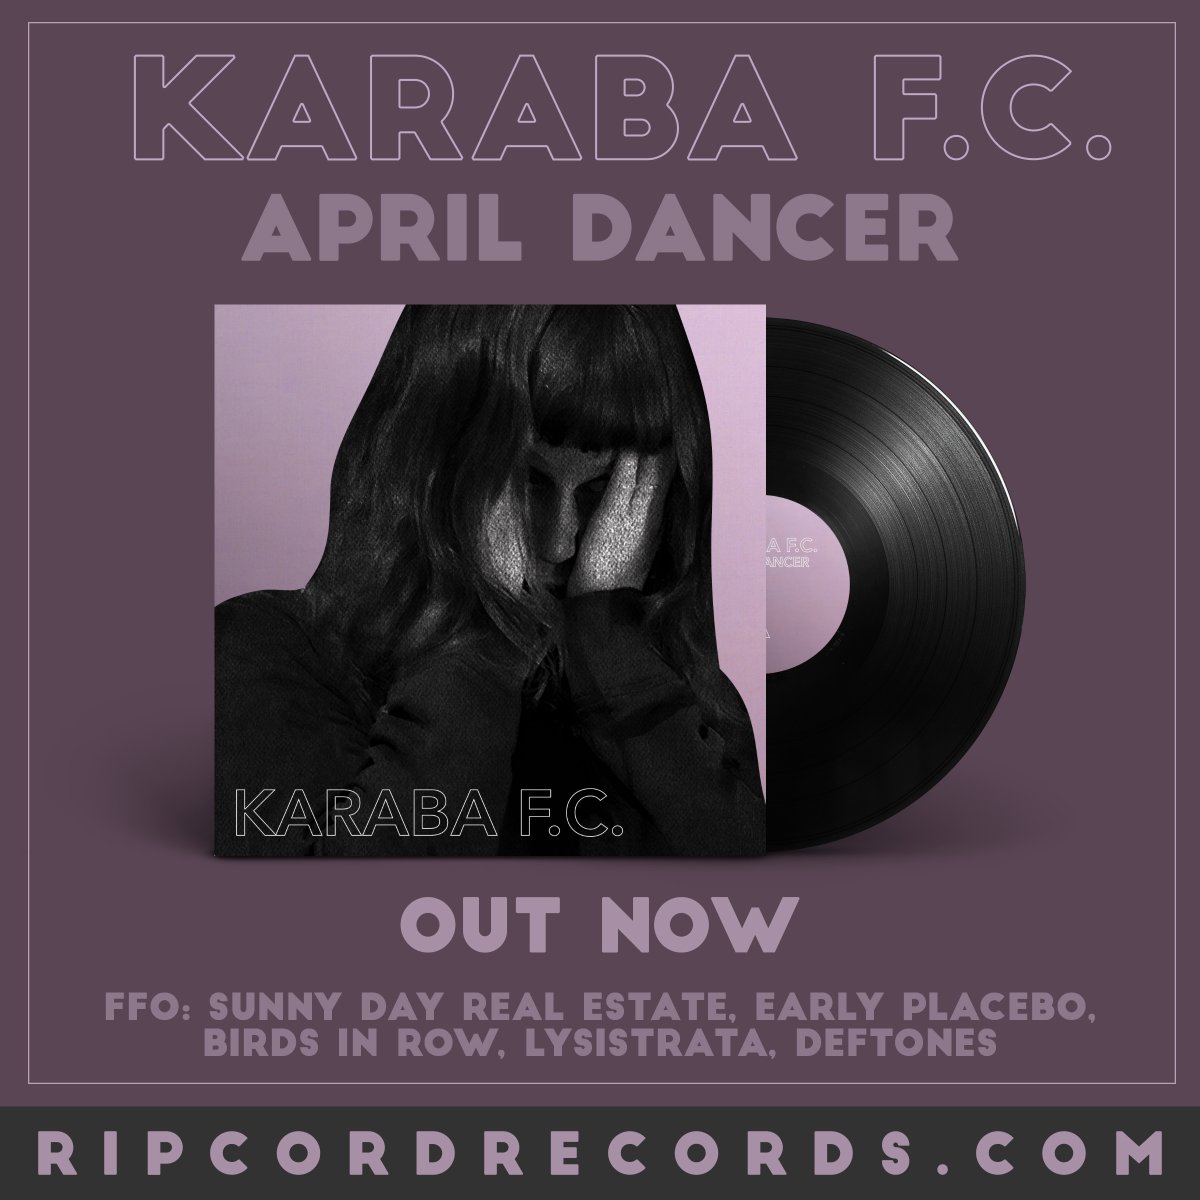 We co-released a banger from Karaba F.C. on Friday. They have various influences from Lysistrata, Sunny Day Real Estate, early Placebo, PG Lost & Birds In Row. The vinyl and digital are available on our Bandcamp now - ripcordrecords.com.